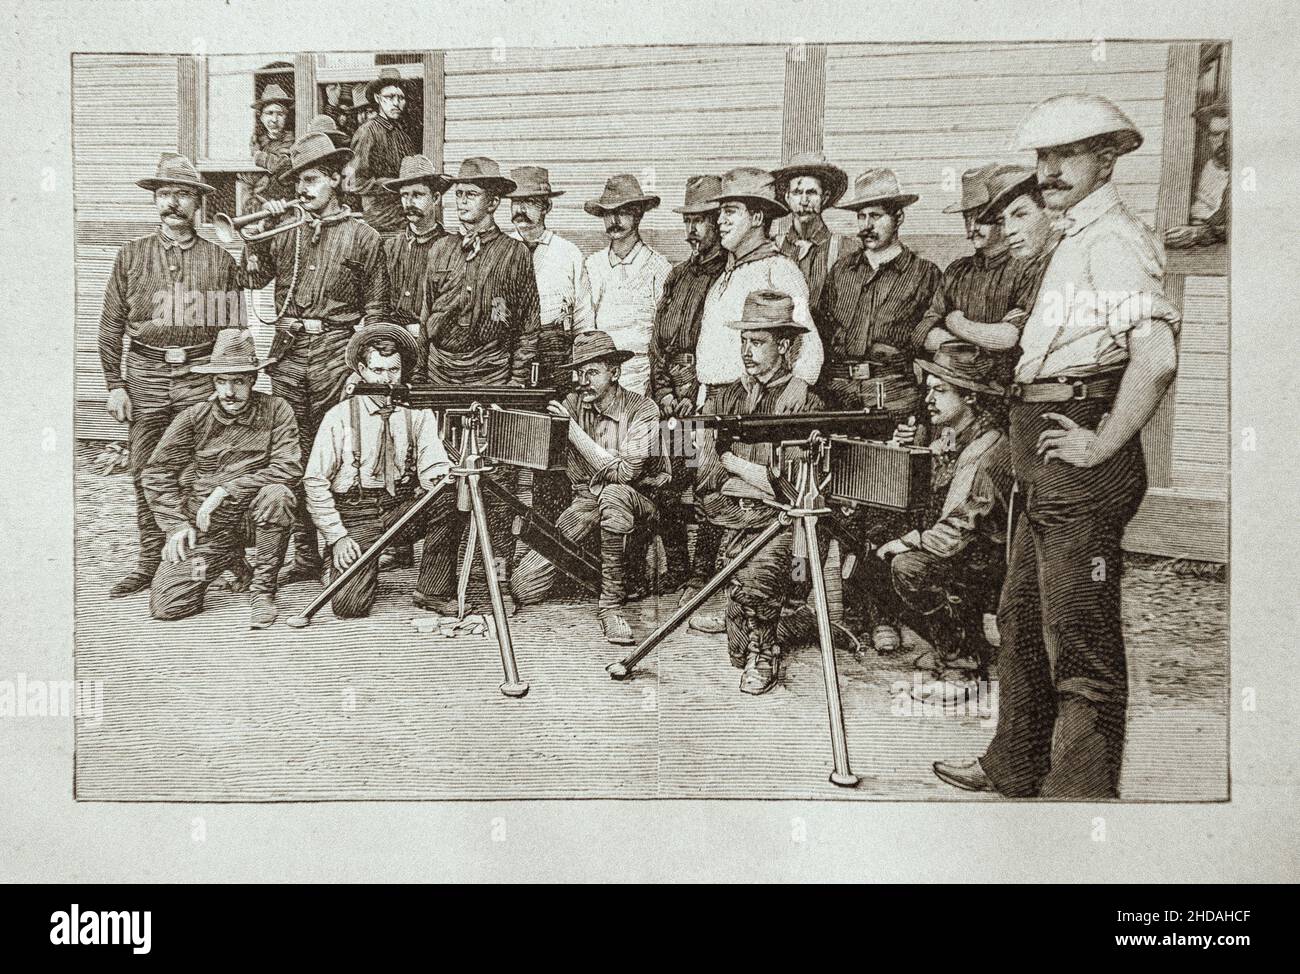 Vintage engraving of Spanish-American War: The 'Rough-Riders' of colonel Roosevelt (1st United States Volunteer Cavalry). 1898 The Spanish–American Wa Stock Photo